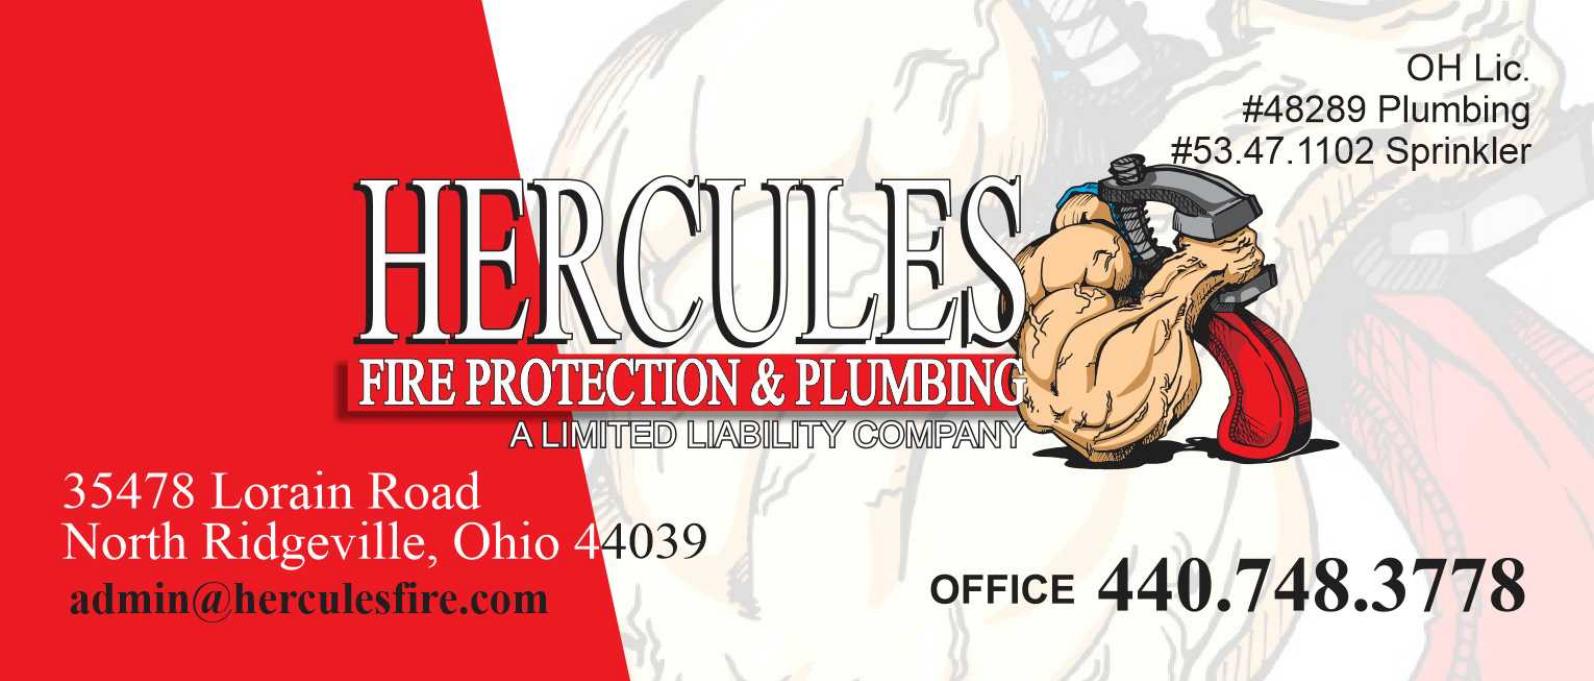 Hercules Fire Protection and Plumbing